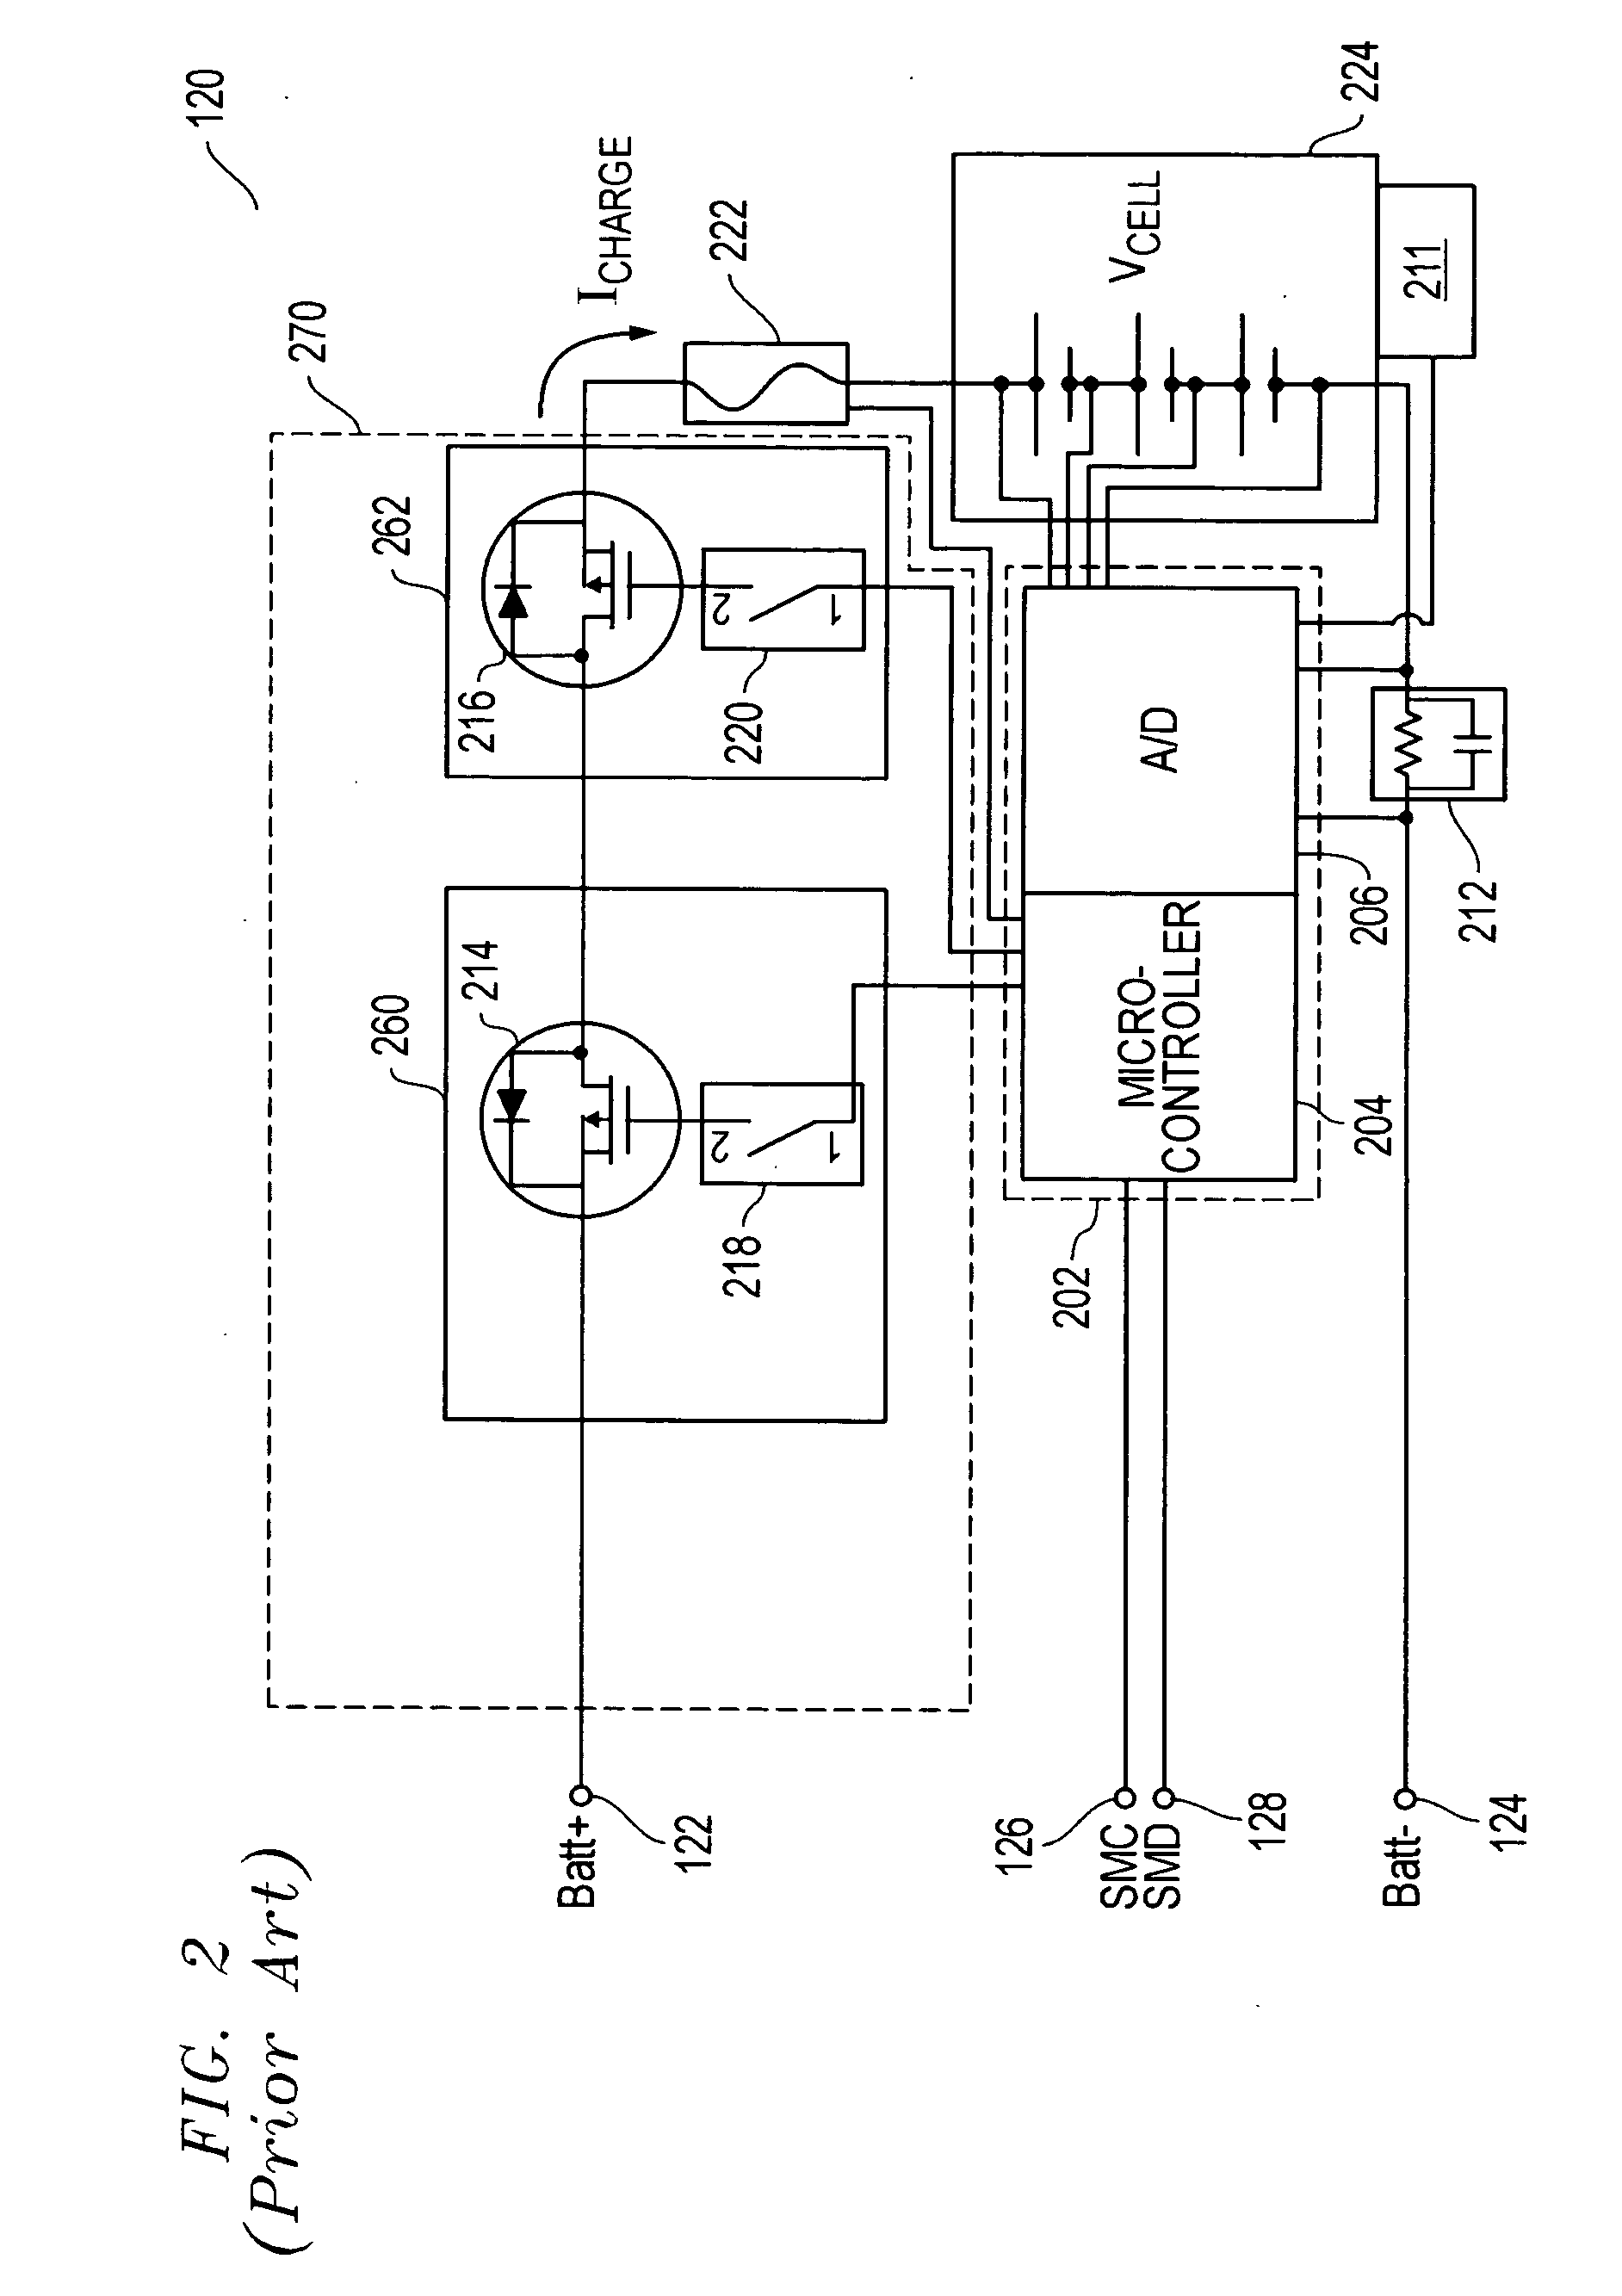 Systems and methods for temperature-dependent battery charging